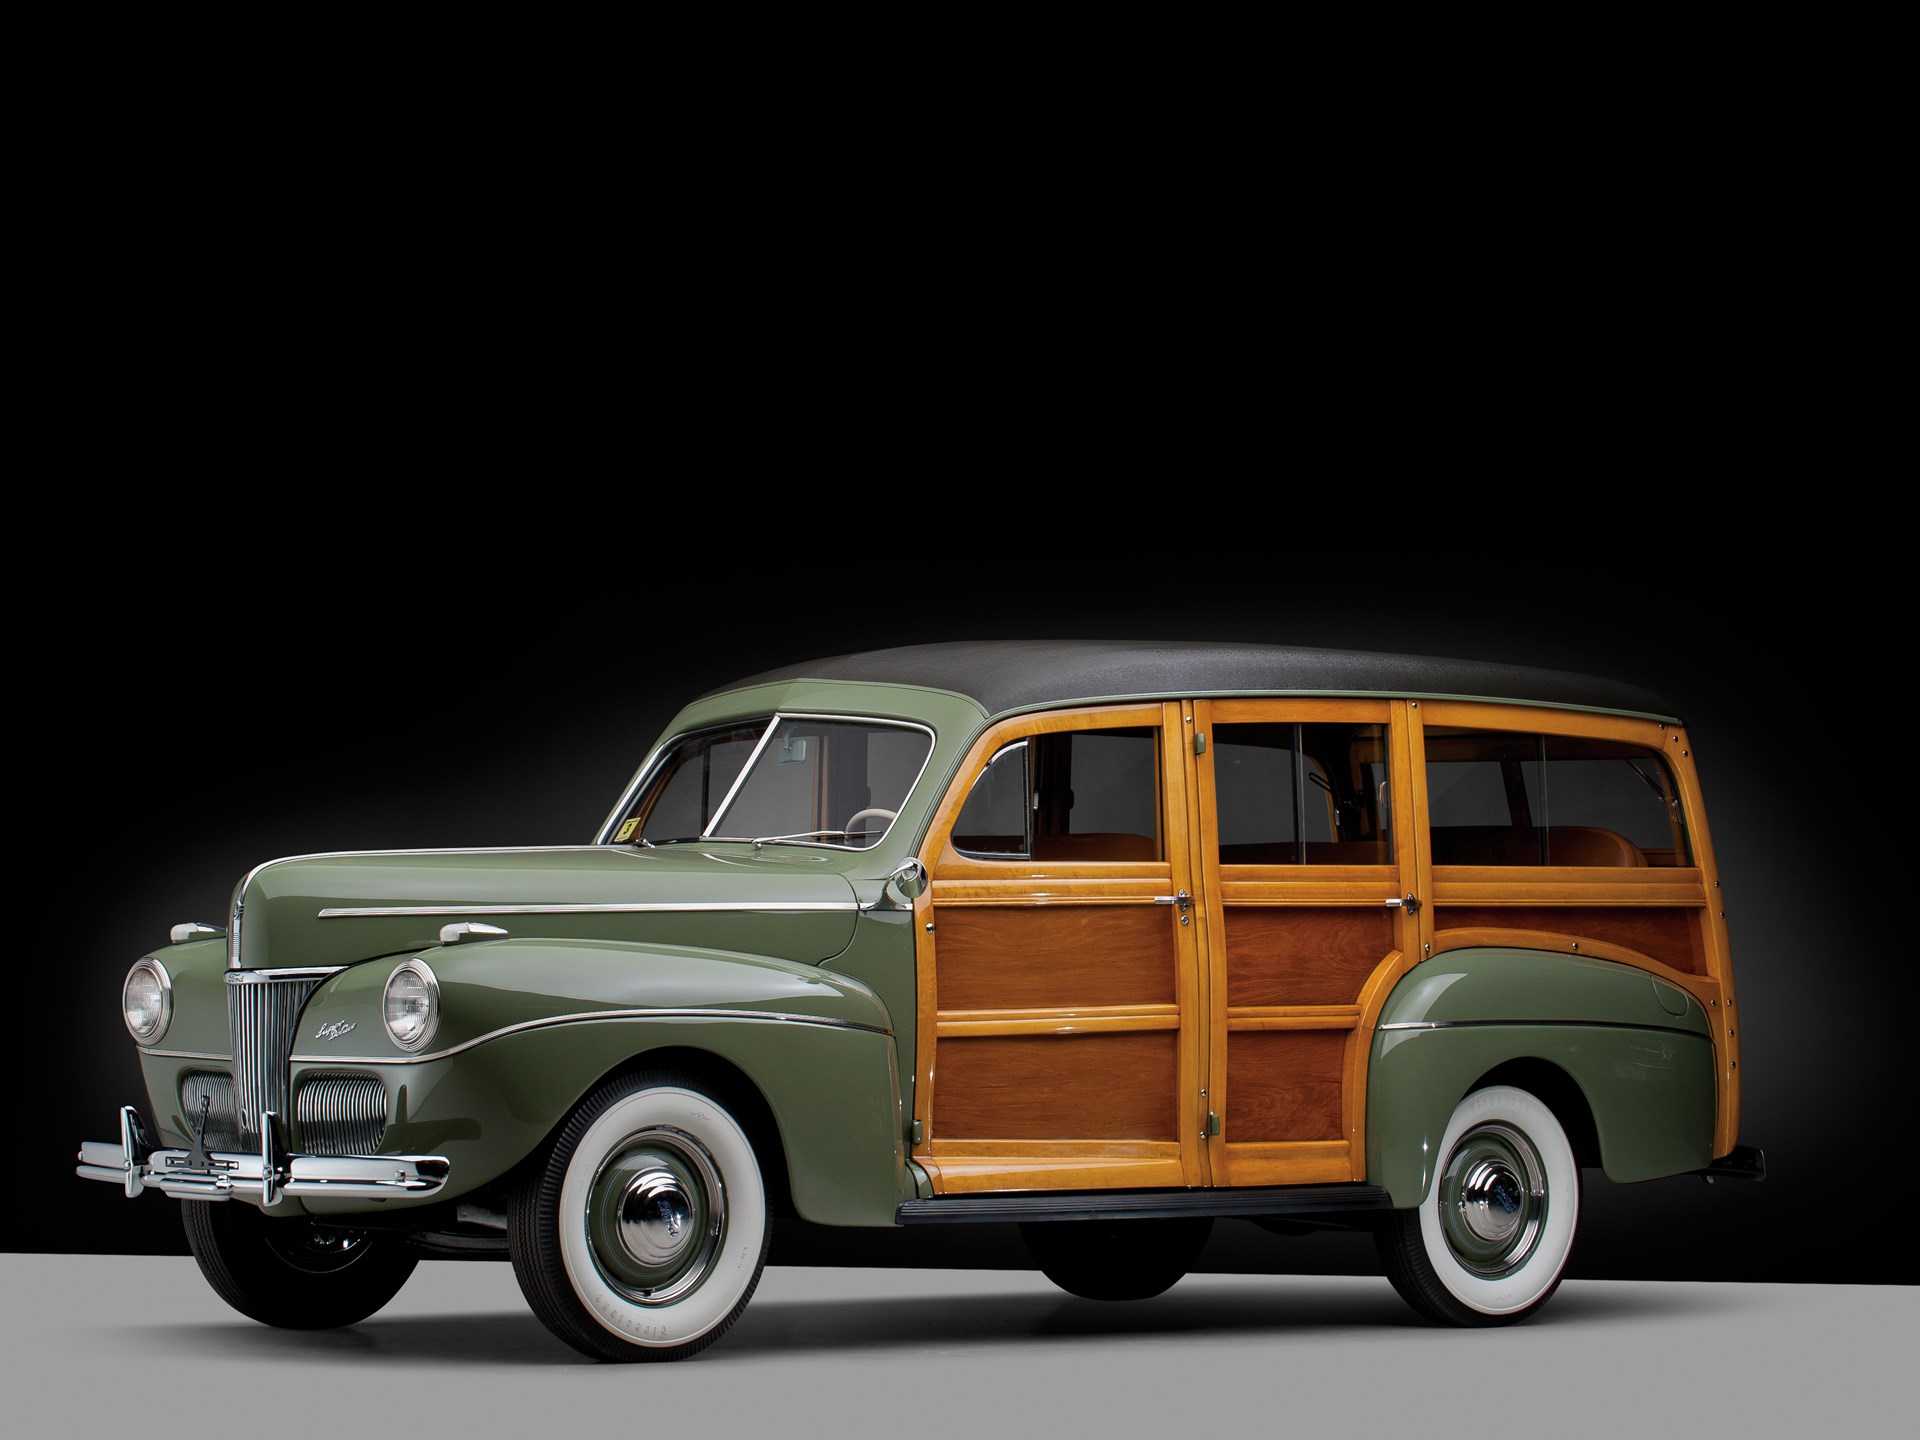 Ford Super Deluxe Station Wagon Wallpaper - 1941 Ford Super Deluxe Woodie Station Wagon - HD Wallpaper 